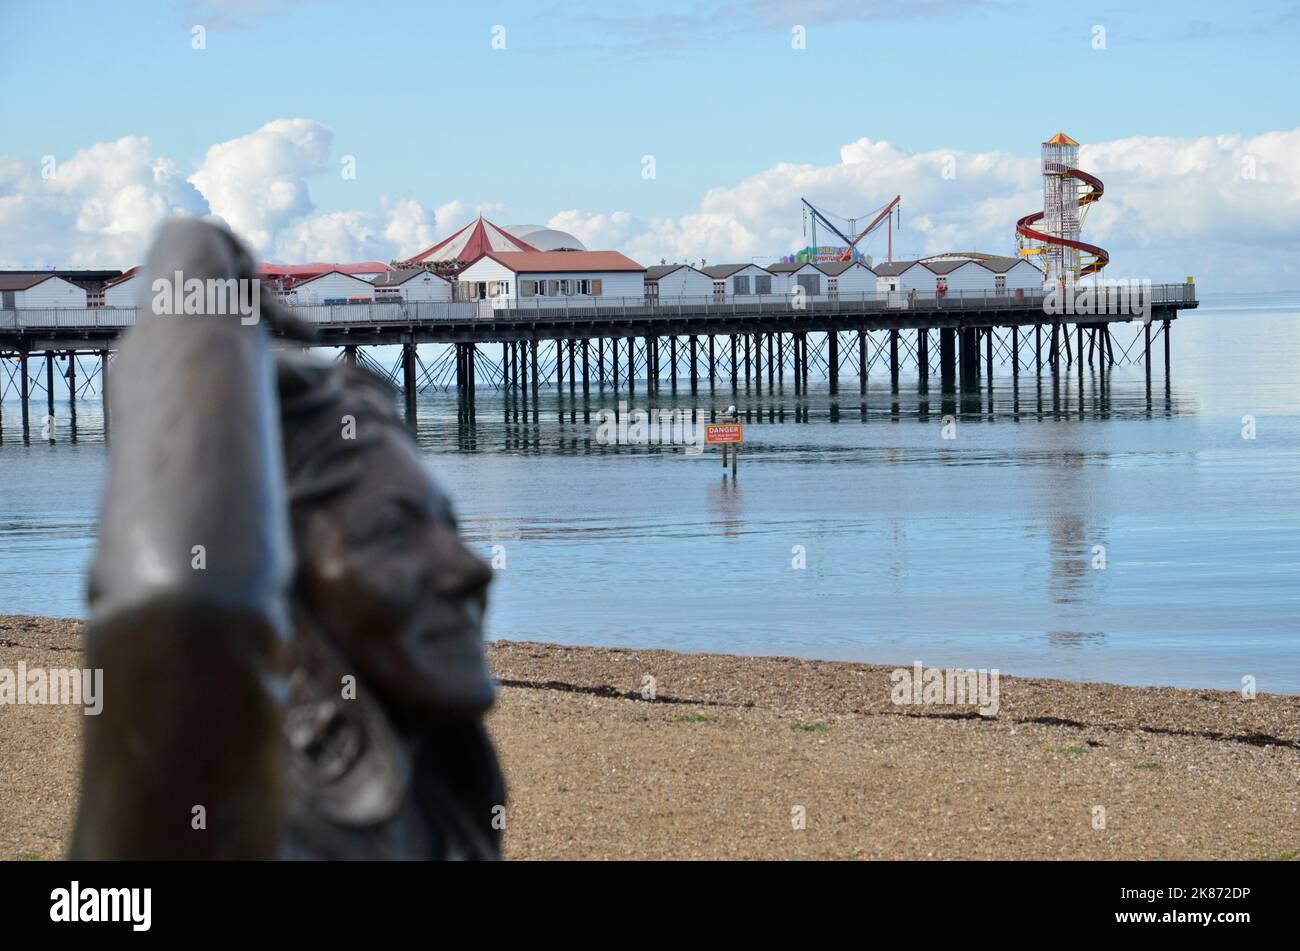 A bronze statue by Stephen Melton of aviator Amy Johnson on the seafront in Herne Bay, Kent. Her plane ditched in the sea near the town in 1941. Stock Photo